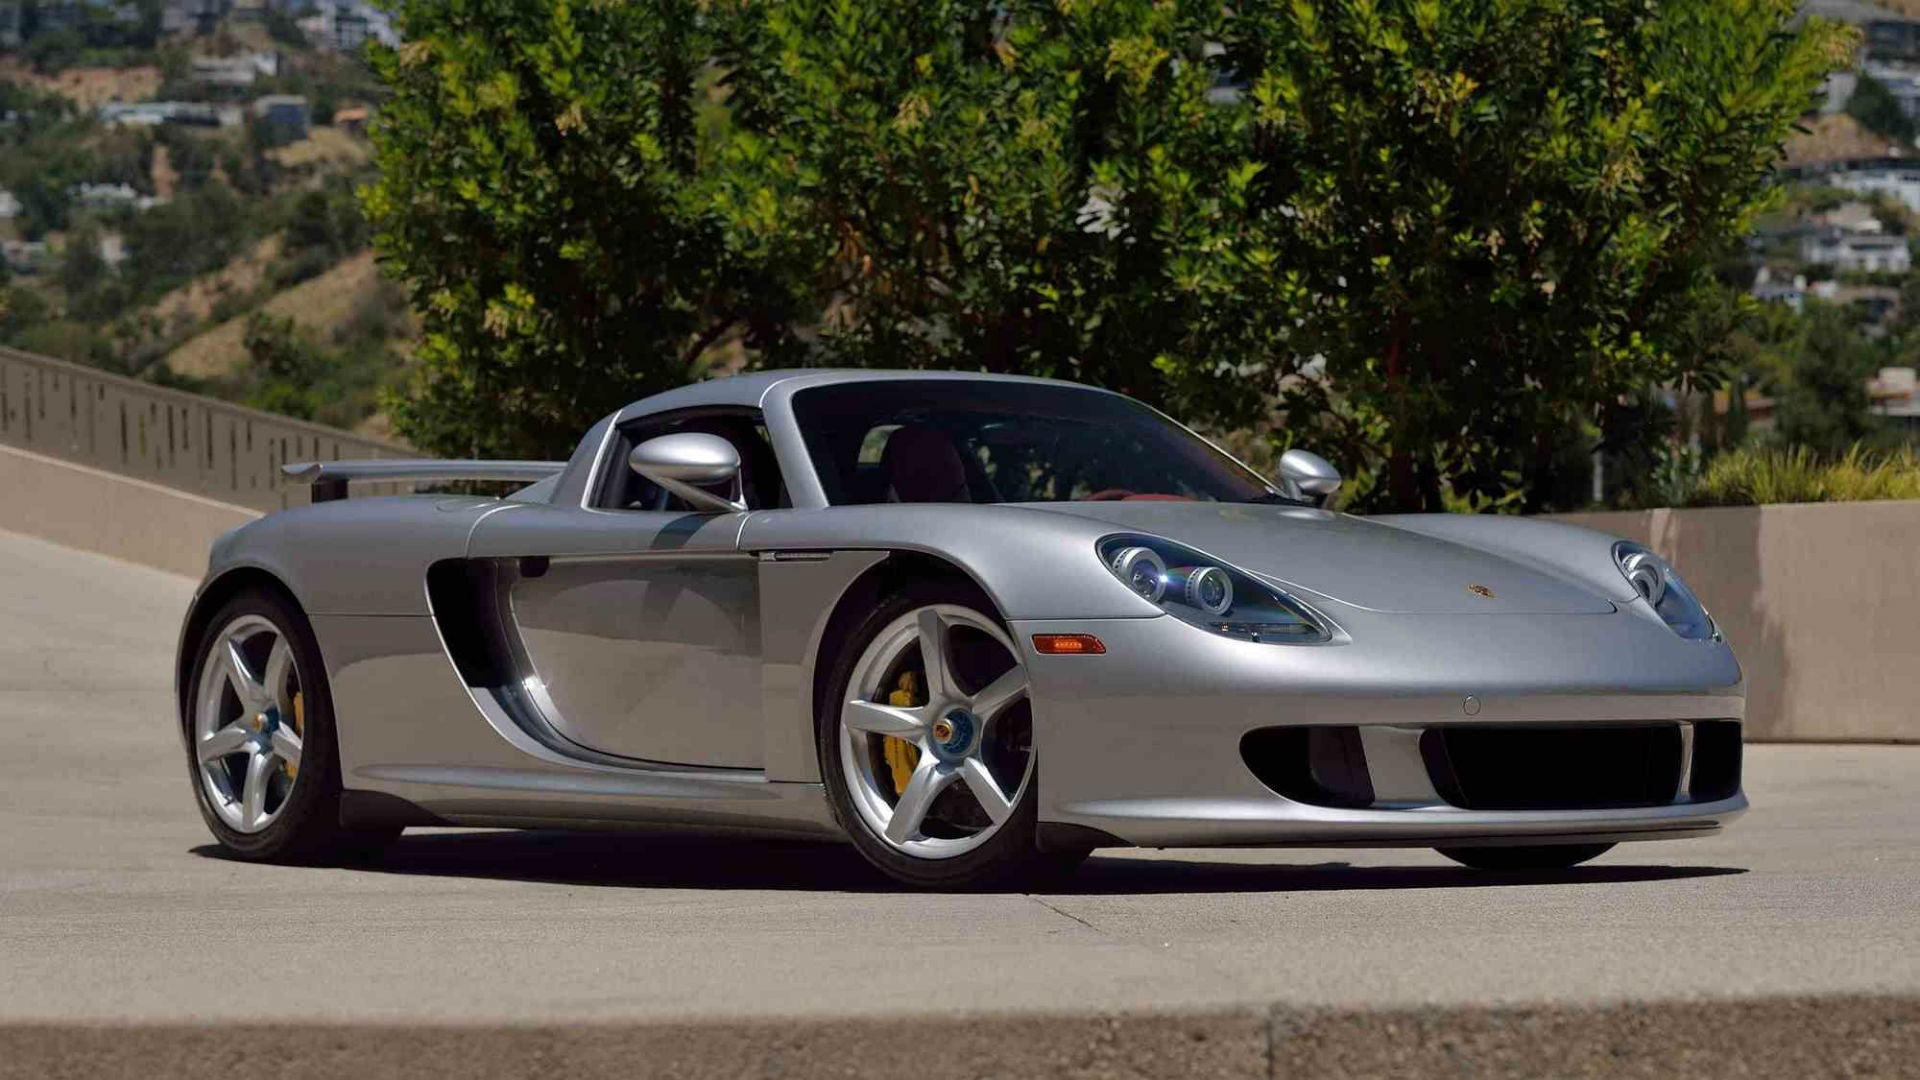 Now's Your Chance to Own a 25Mile Porsche Carrera GT